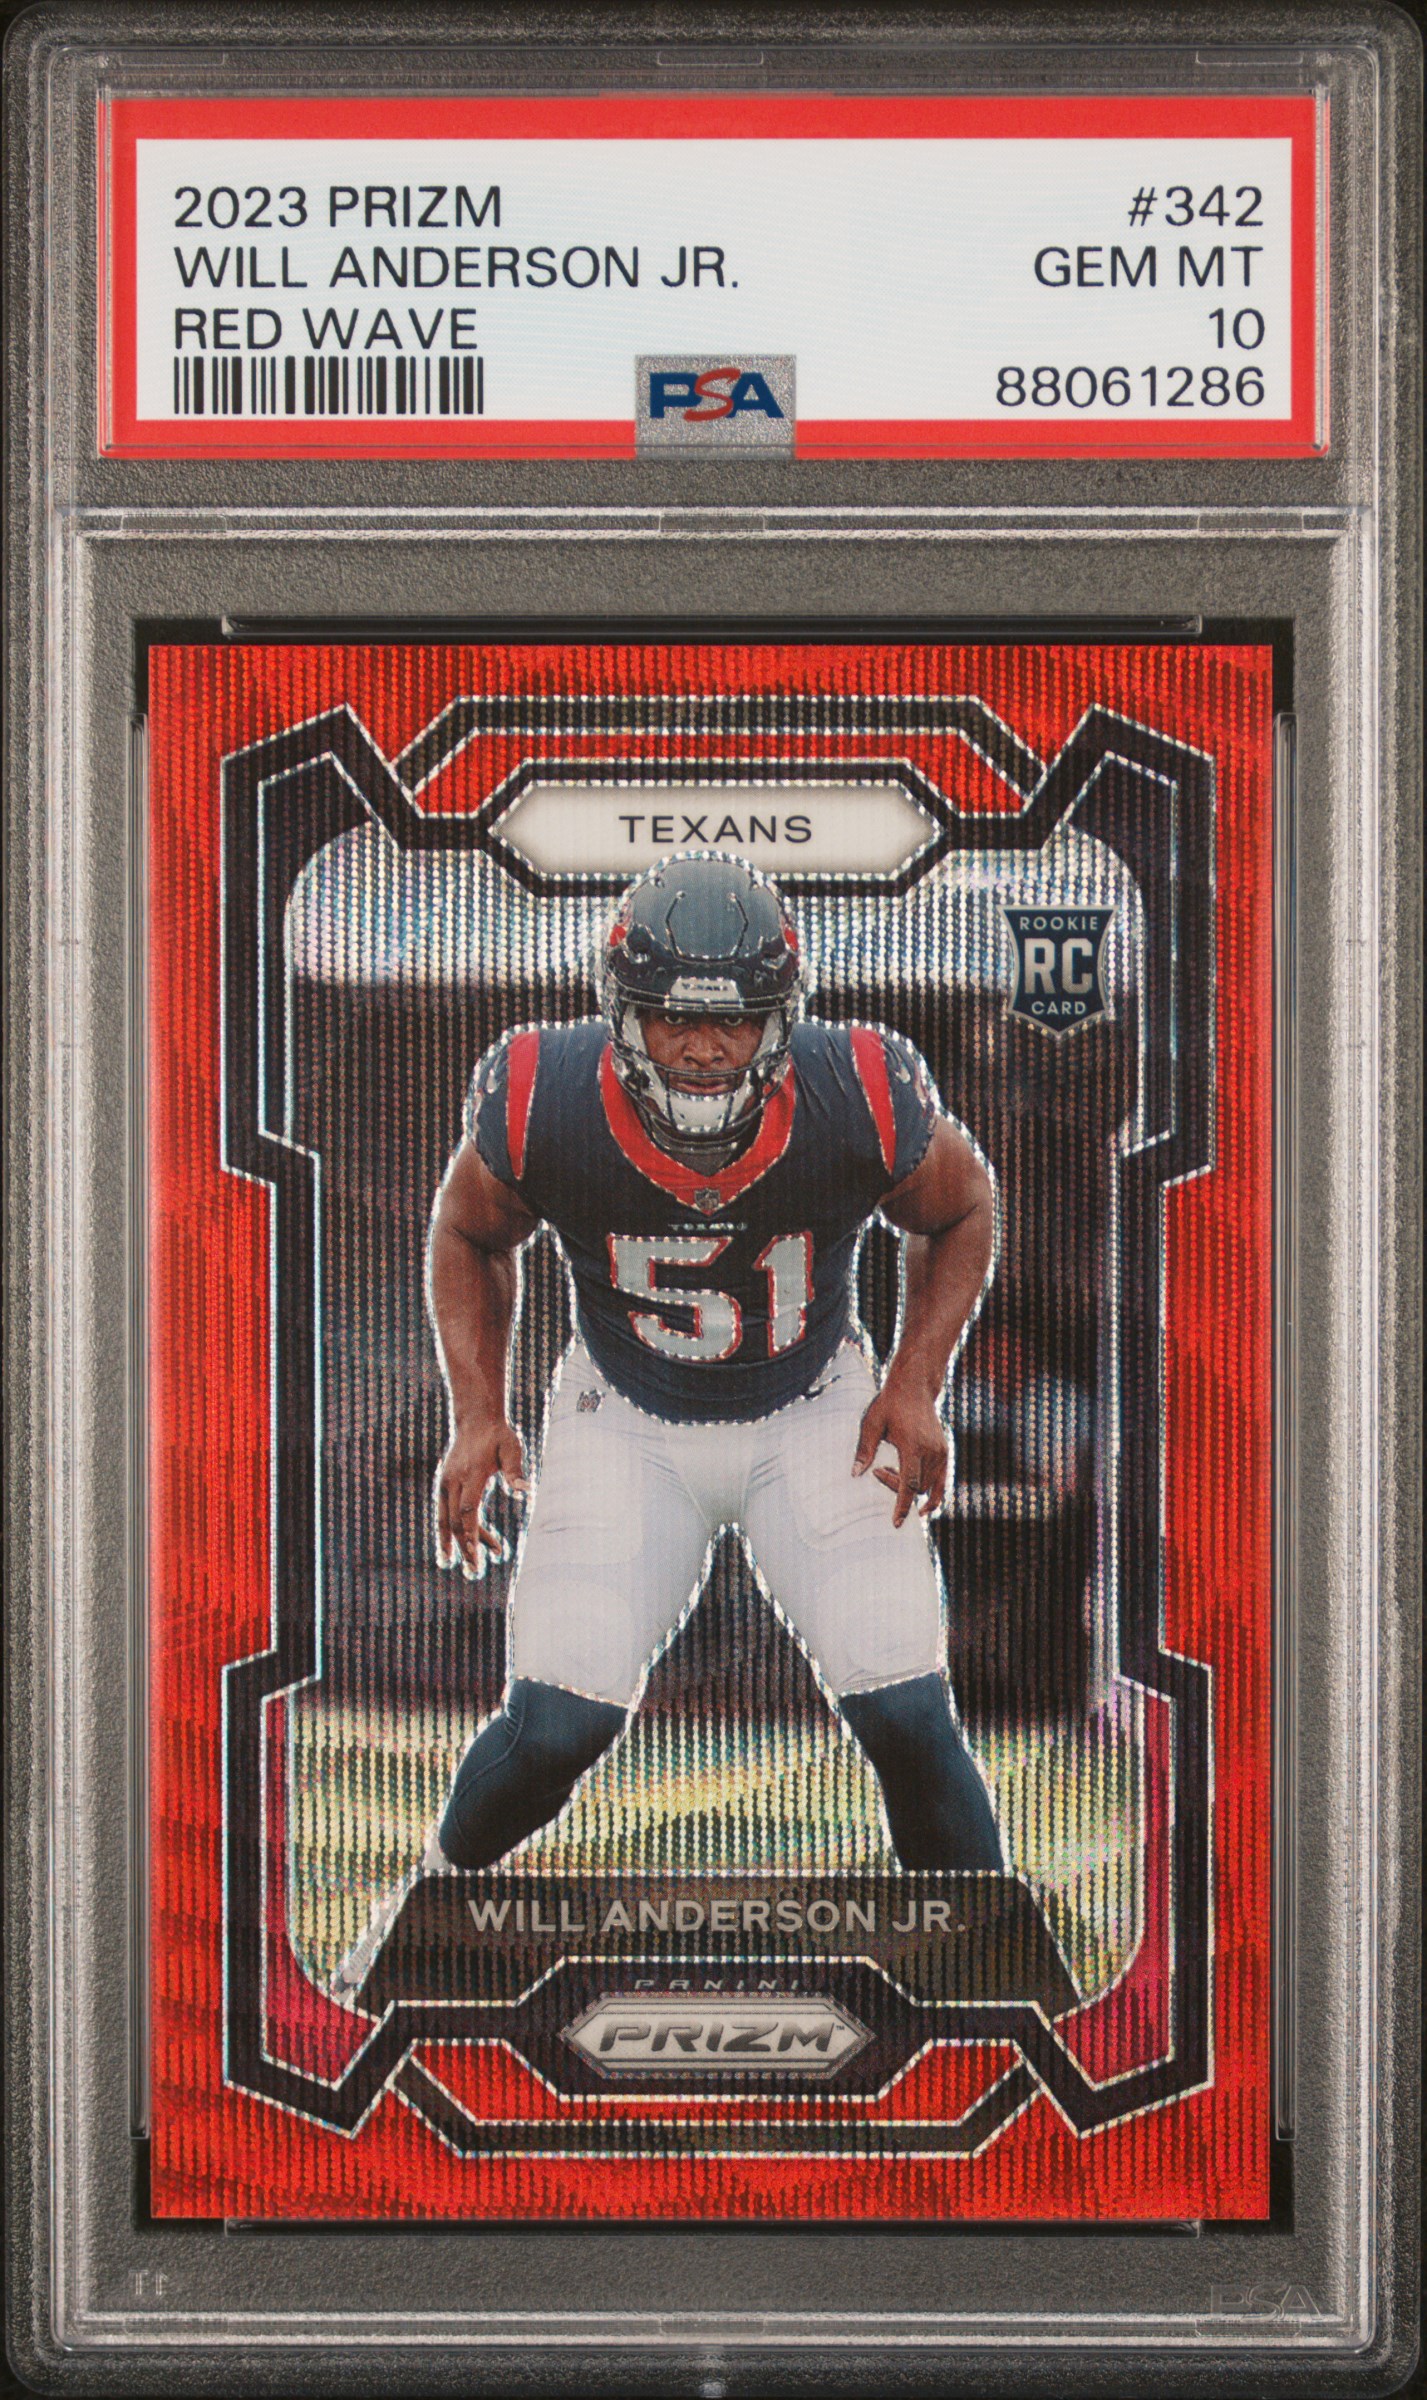 2023 Panini Prizm Red Wave #342 Will Anderson Jr. Rookie Card (#096/149) – PSA GEM MT 10